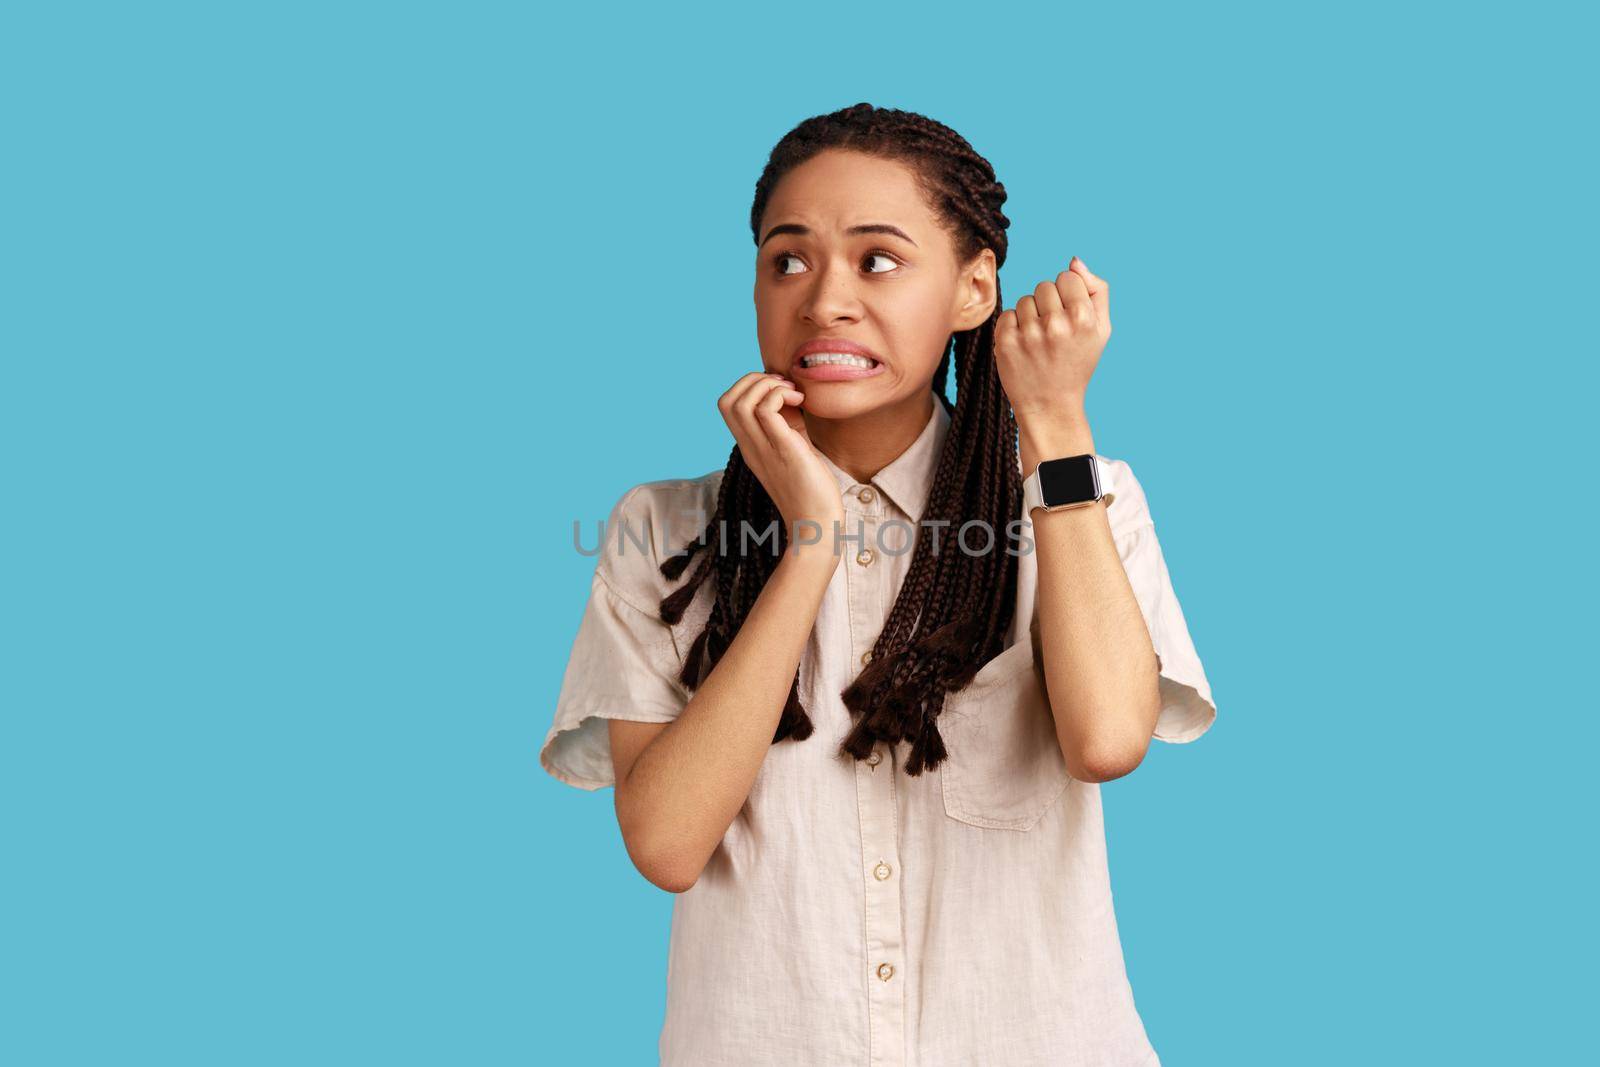 Displeased impatient woman pointing finger on her wrist clock, looking at camera with anxious, worried about deadline, wearing white shirt. Indoor studio shot isolated on blue background.